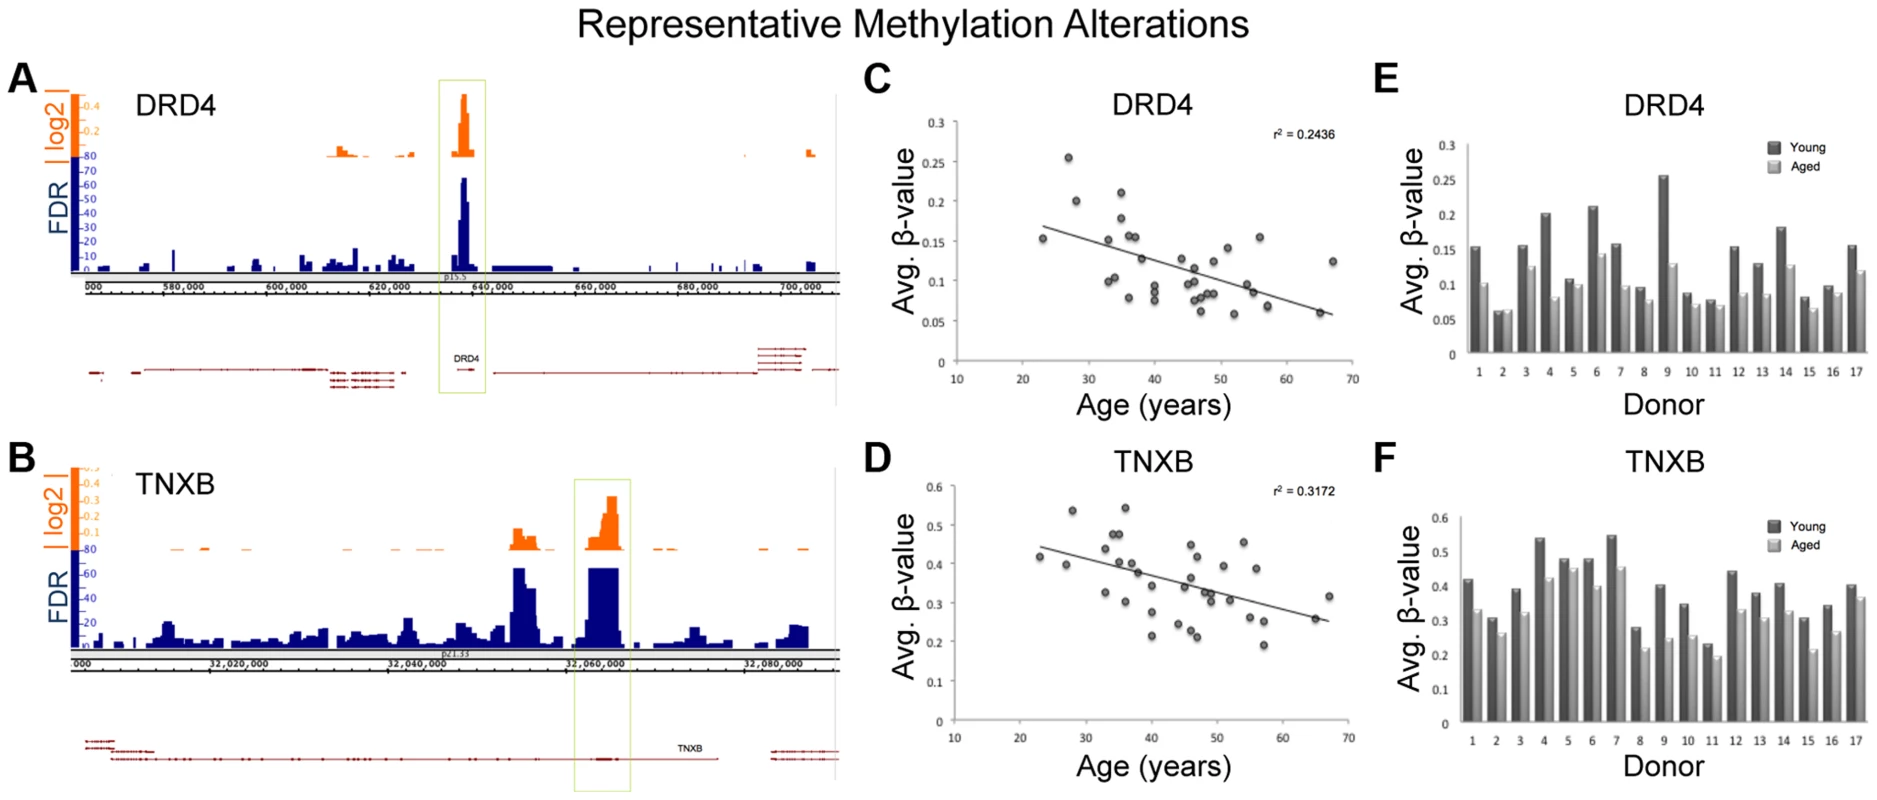 Various descriptive statistics are presented for both TNXB and DRD4; 2 regions of representative methylation alterations.